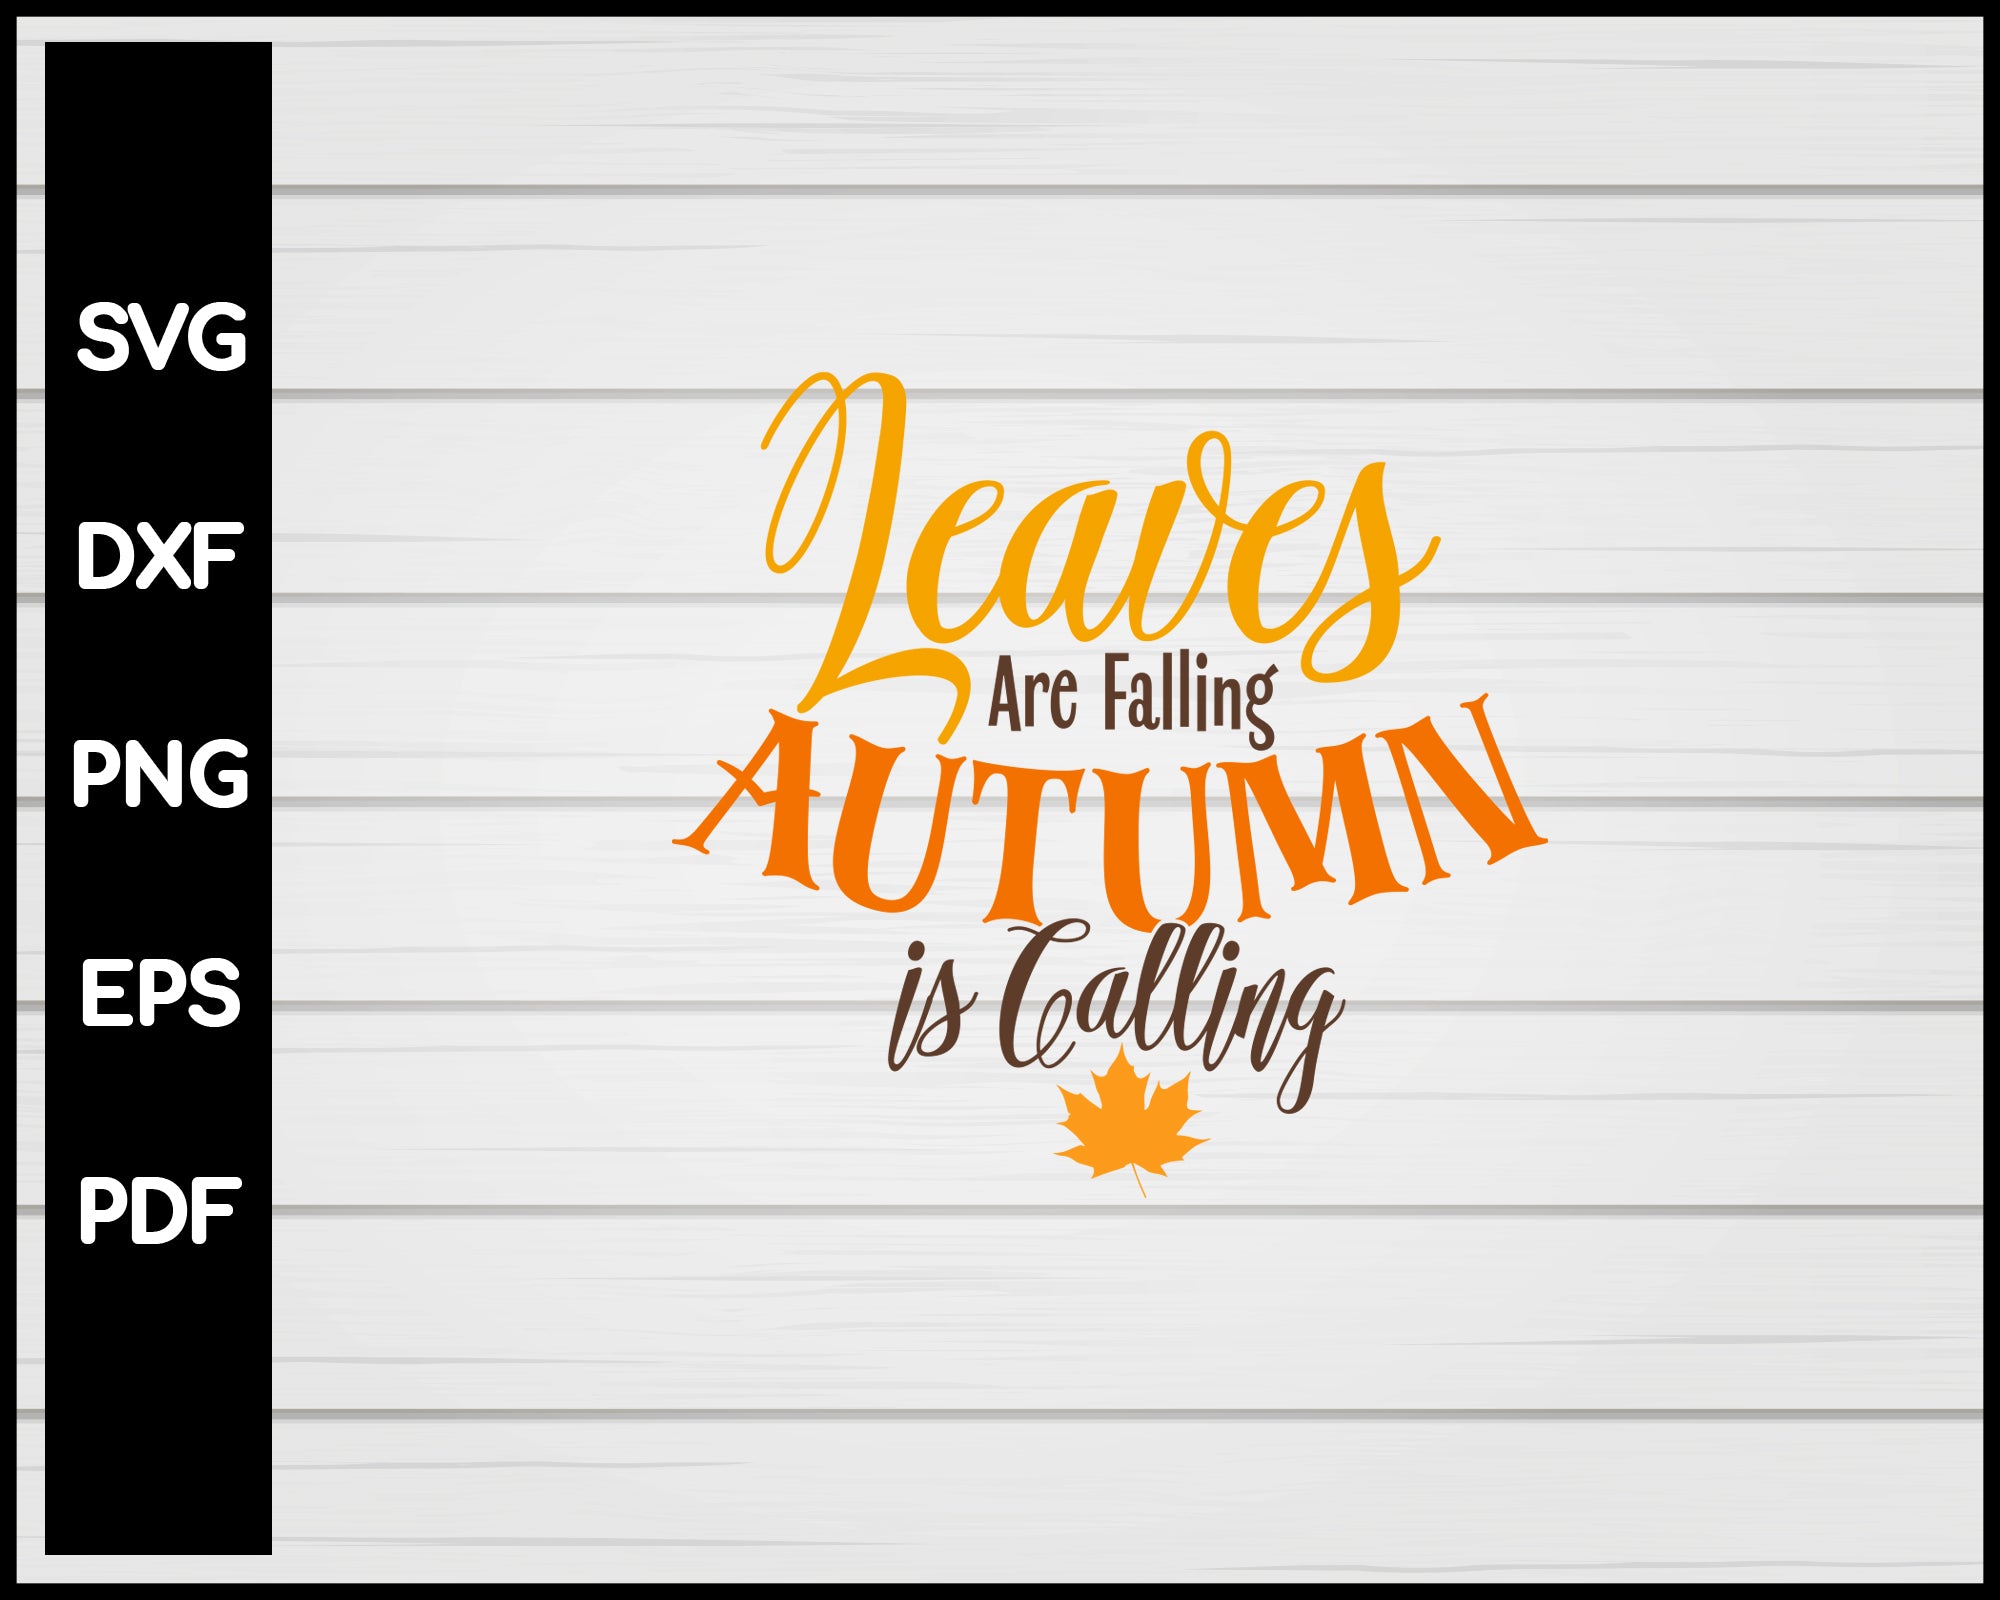 Leaves Are Falling Autumn Is Calling svg